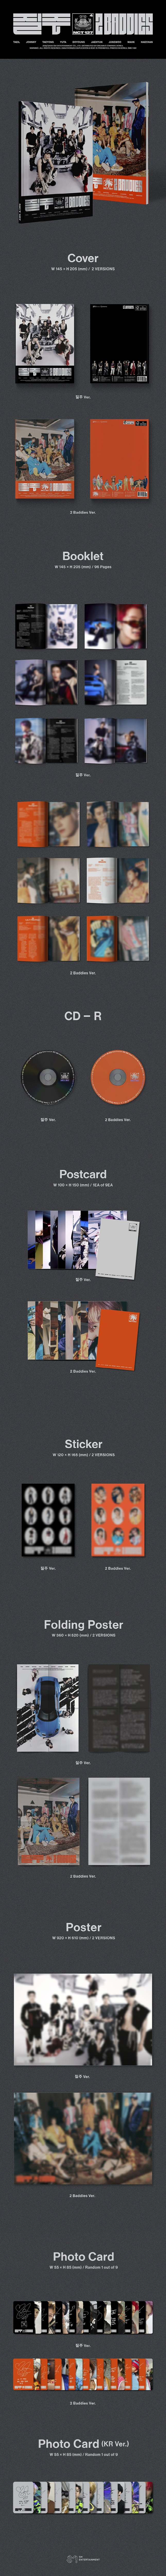 1 CD
1 Postcard (random out of 9 types)
1 Folded Poster
1 Sticker
1 CD
1 Booklet (96 pages)
1 Postcard (random out of 9 ty...